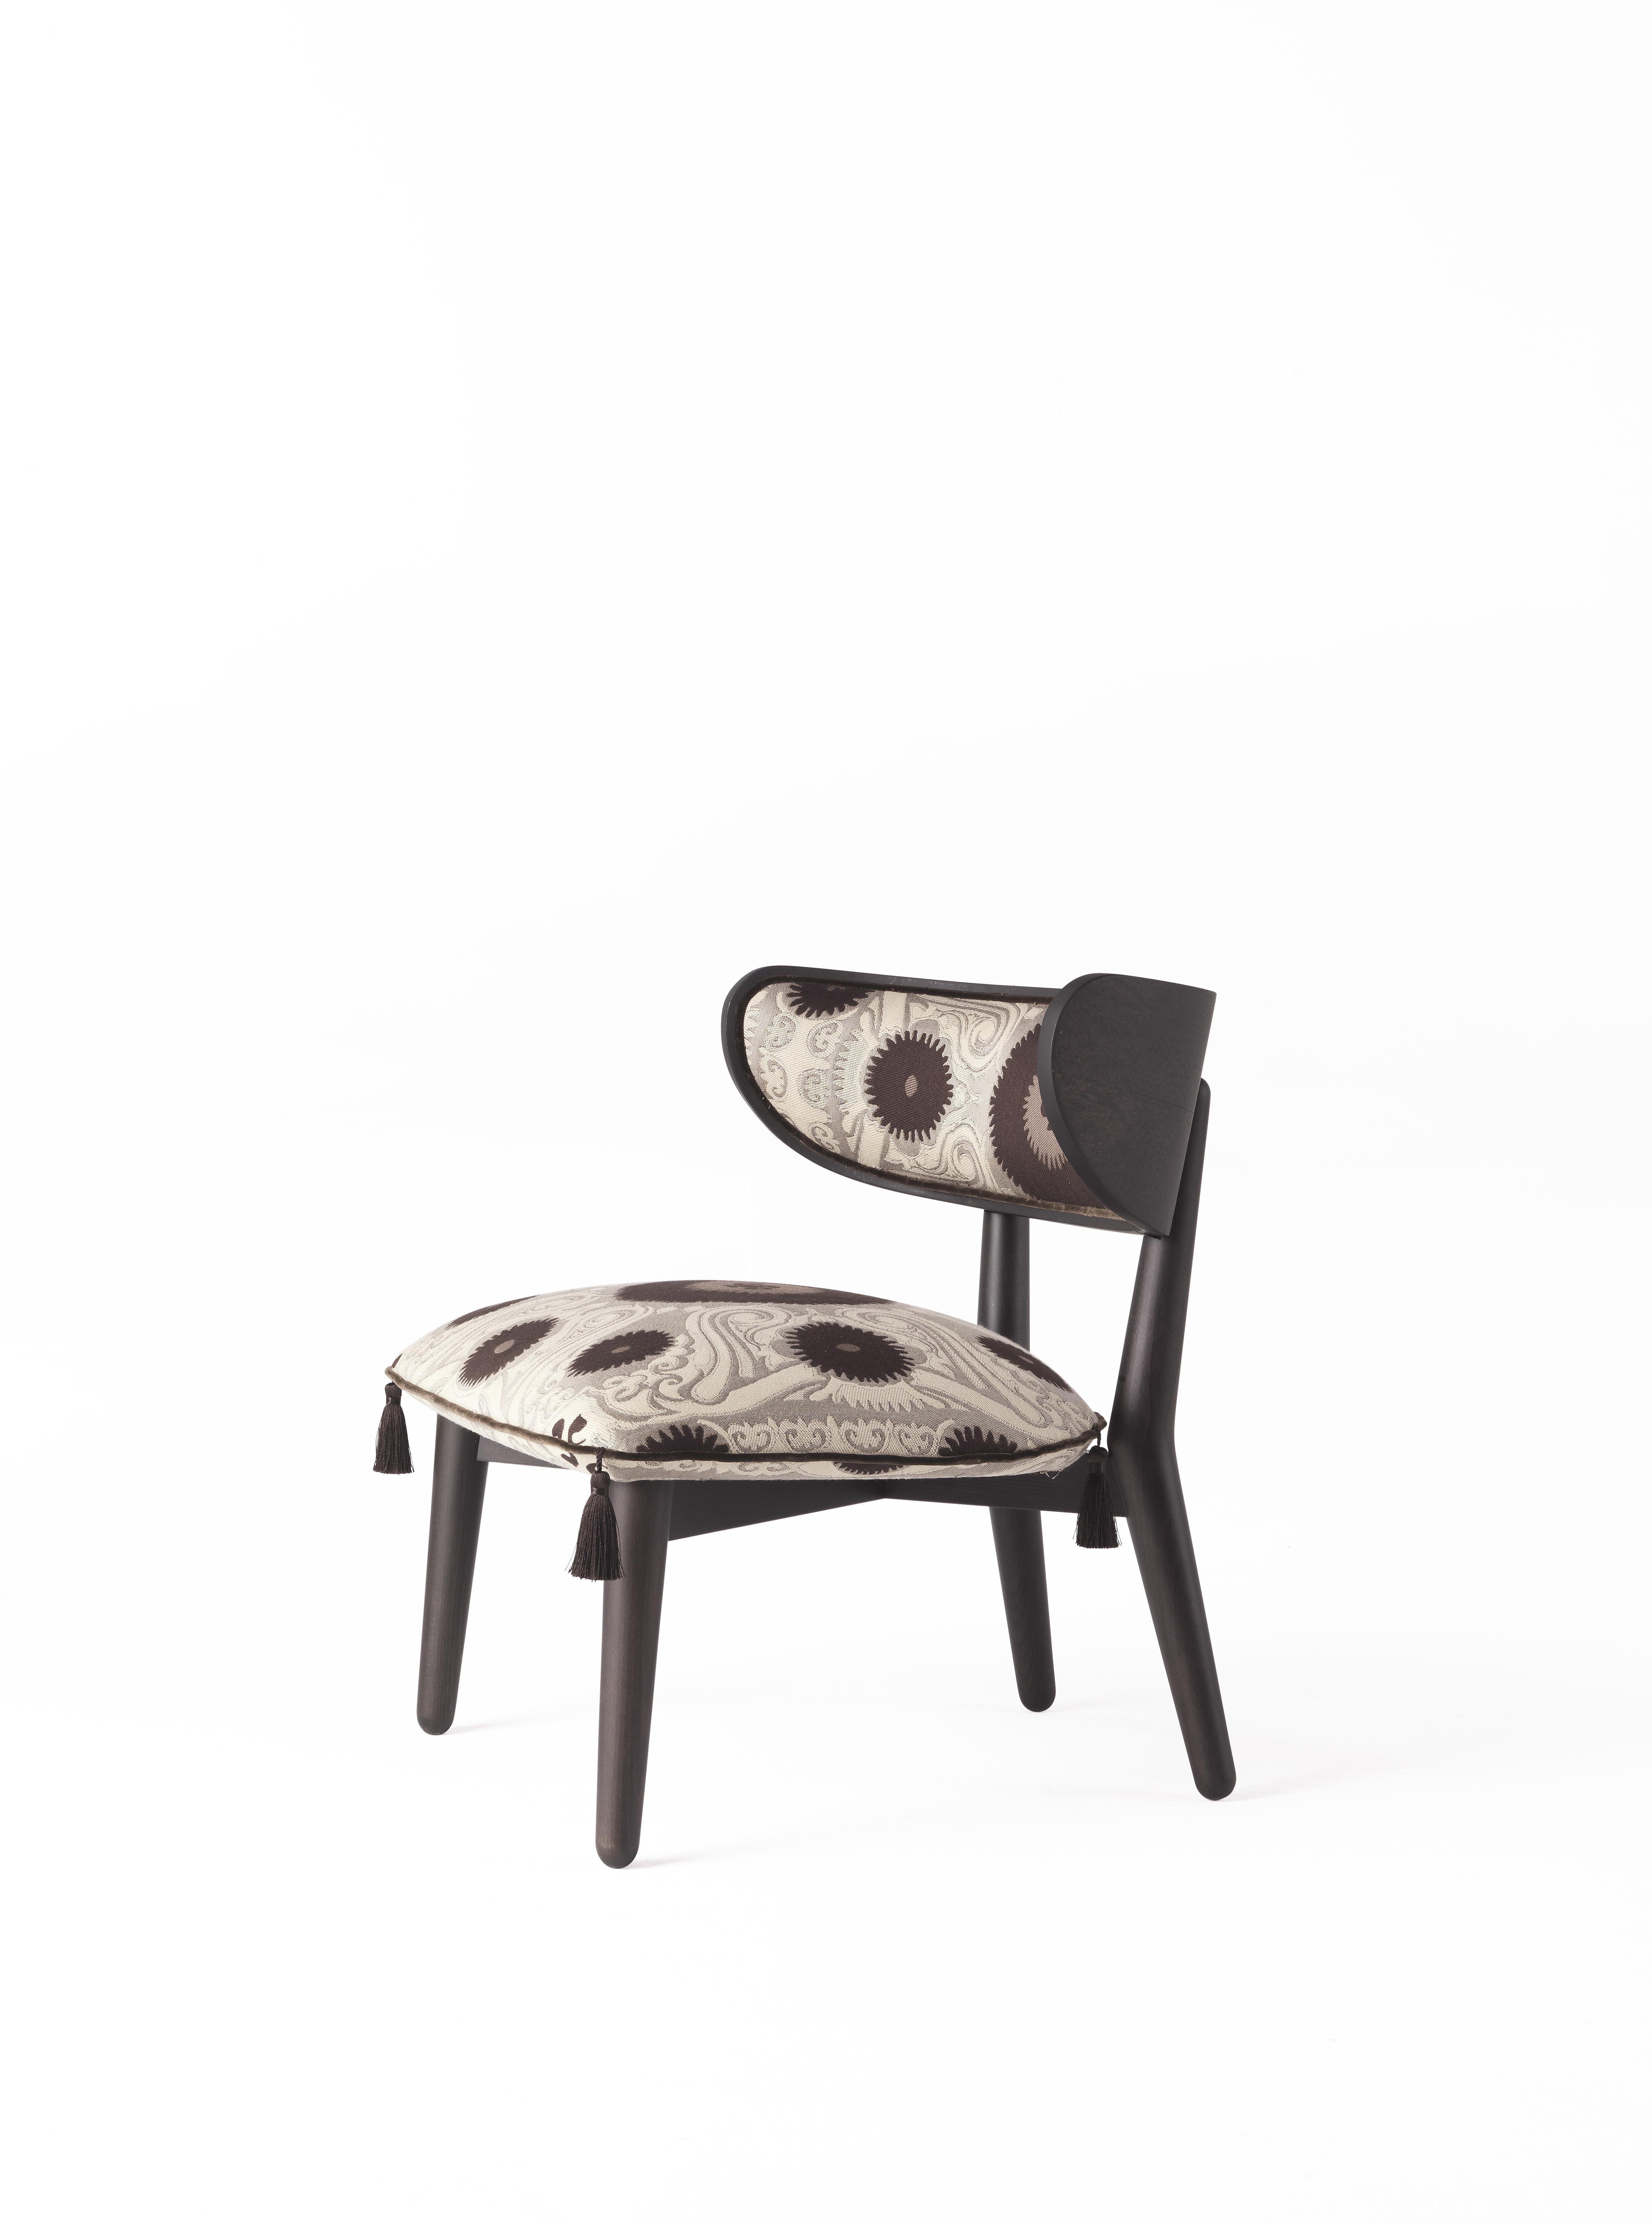 A welcoming and evocative armchair that celebrates ETRO Home Interiors’ eclectic soul. The ethnic inspiration, already present in the name that refers to the kings of the Persian tradition, is found in the cushion resting on the seat, recalling the